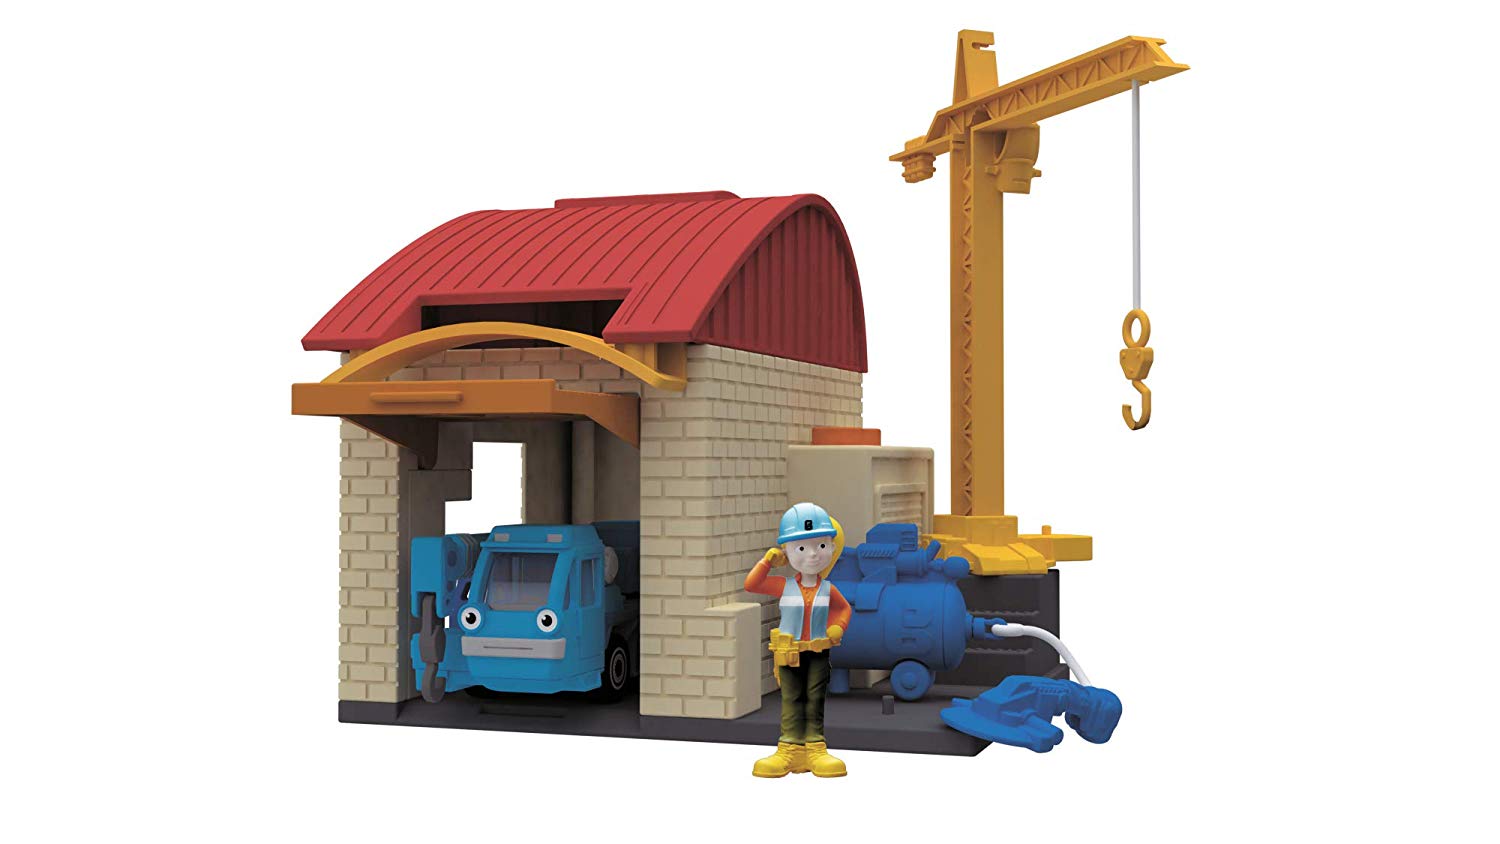 Dickie Toys 203133010 Bob The Builder Garage Play Set Play Garage With Mult